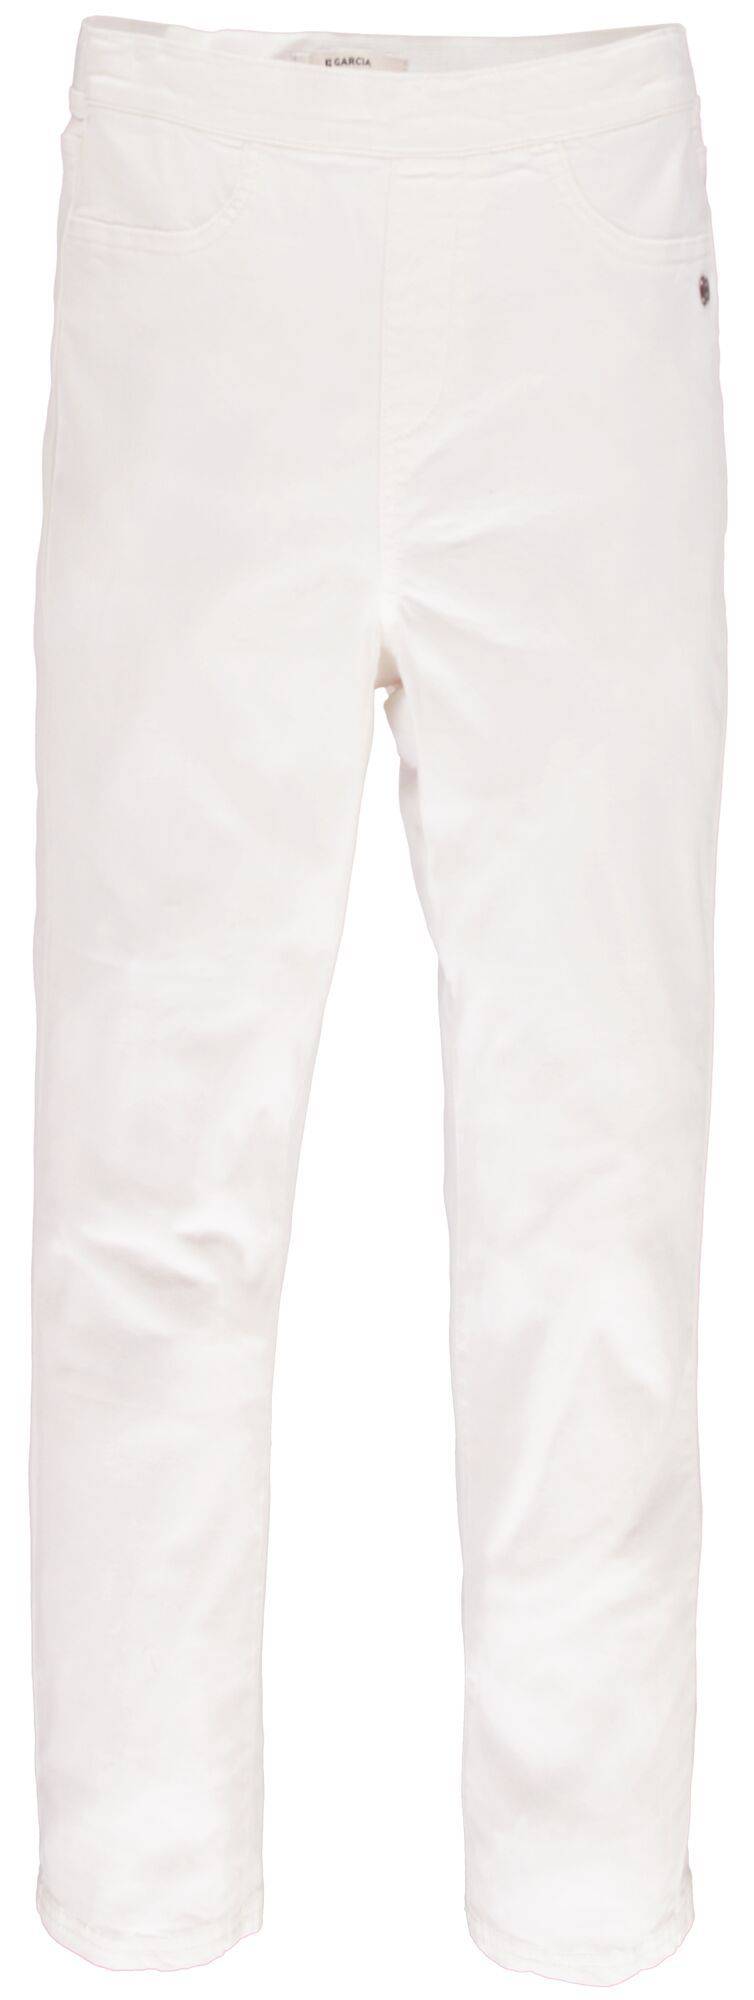 Garcia Off White Capri Denims - Your Style Your Story